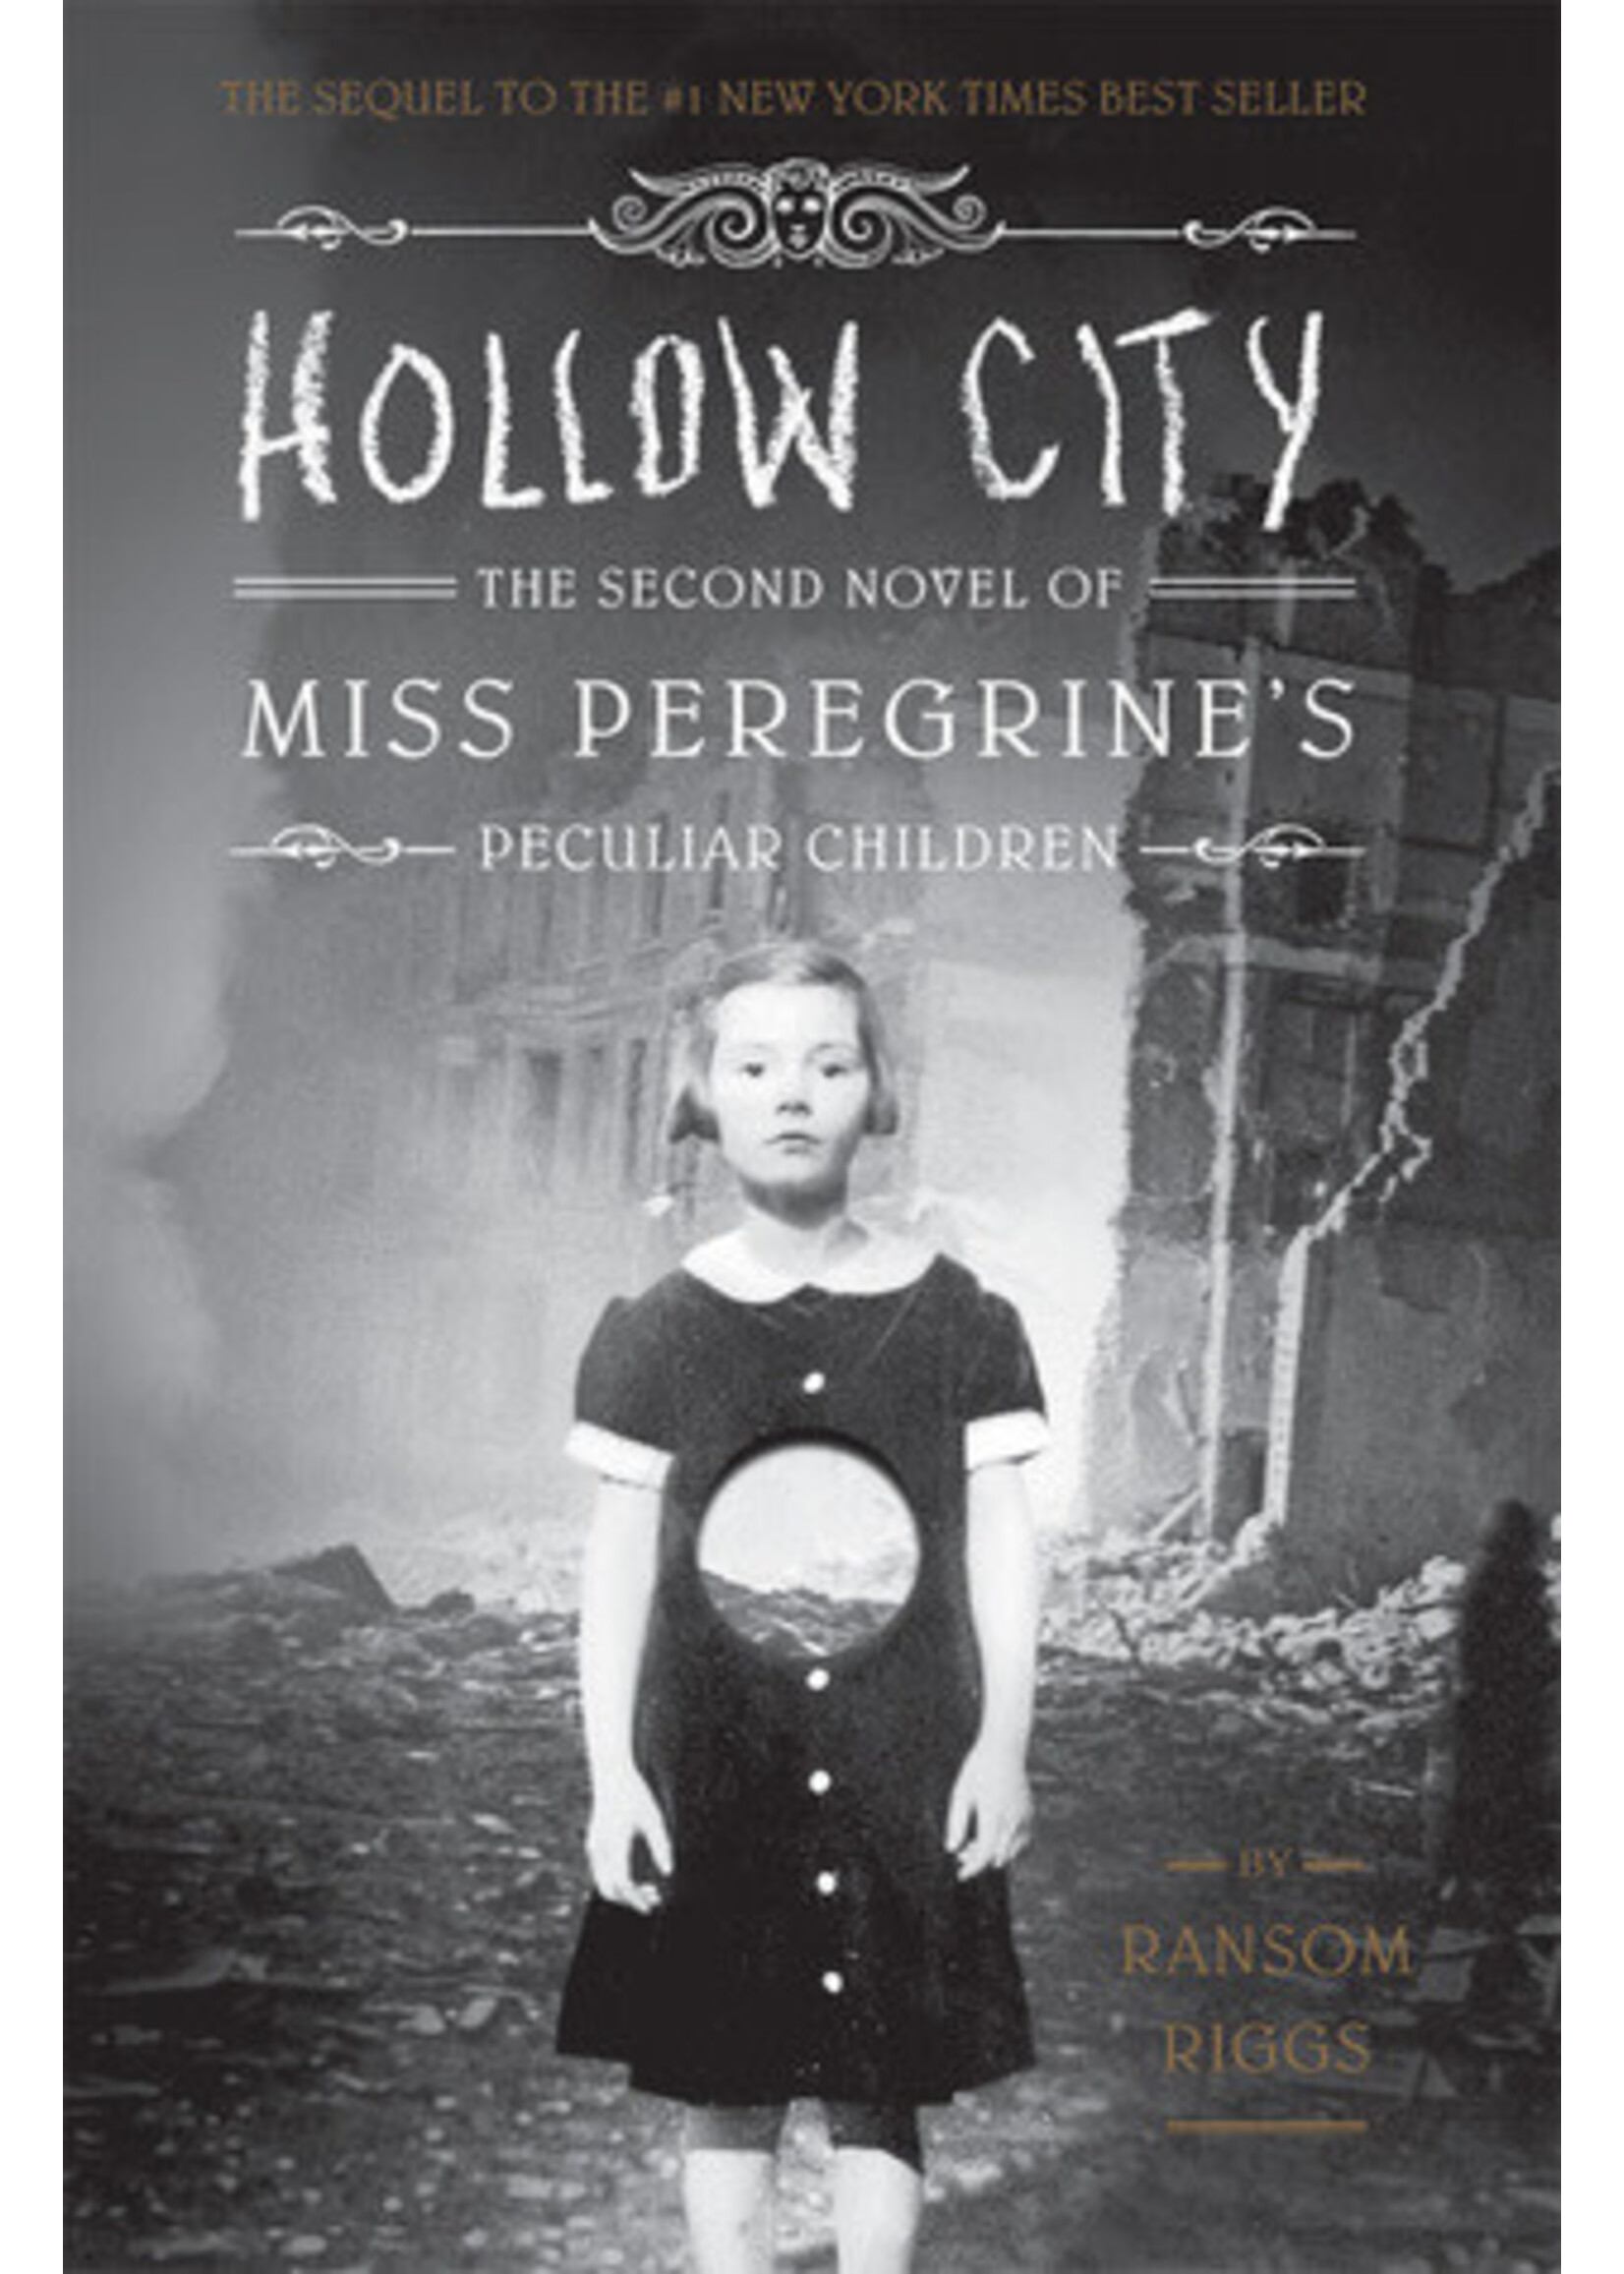 Hollow City (Miss Peregrine's Peculiar Children #2) by Ransom Riggs